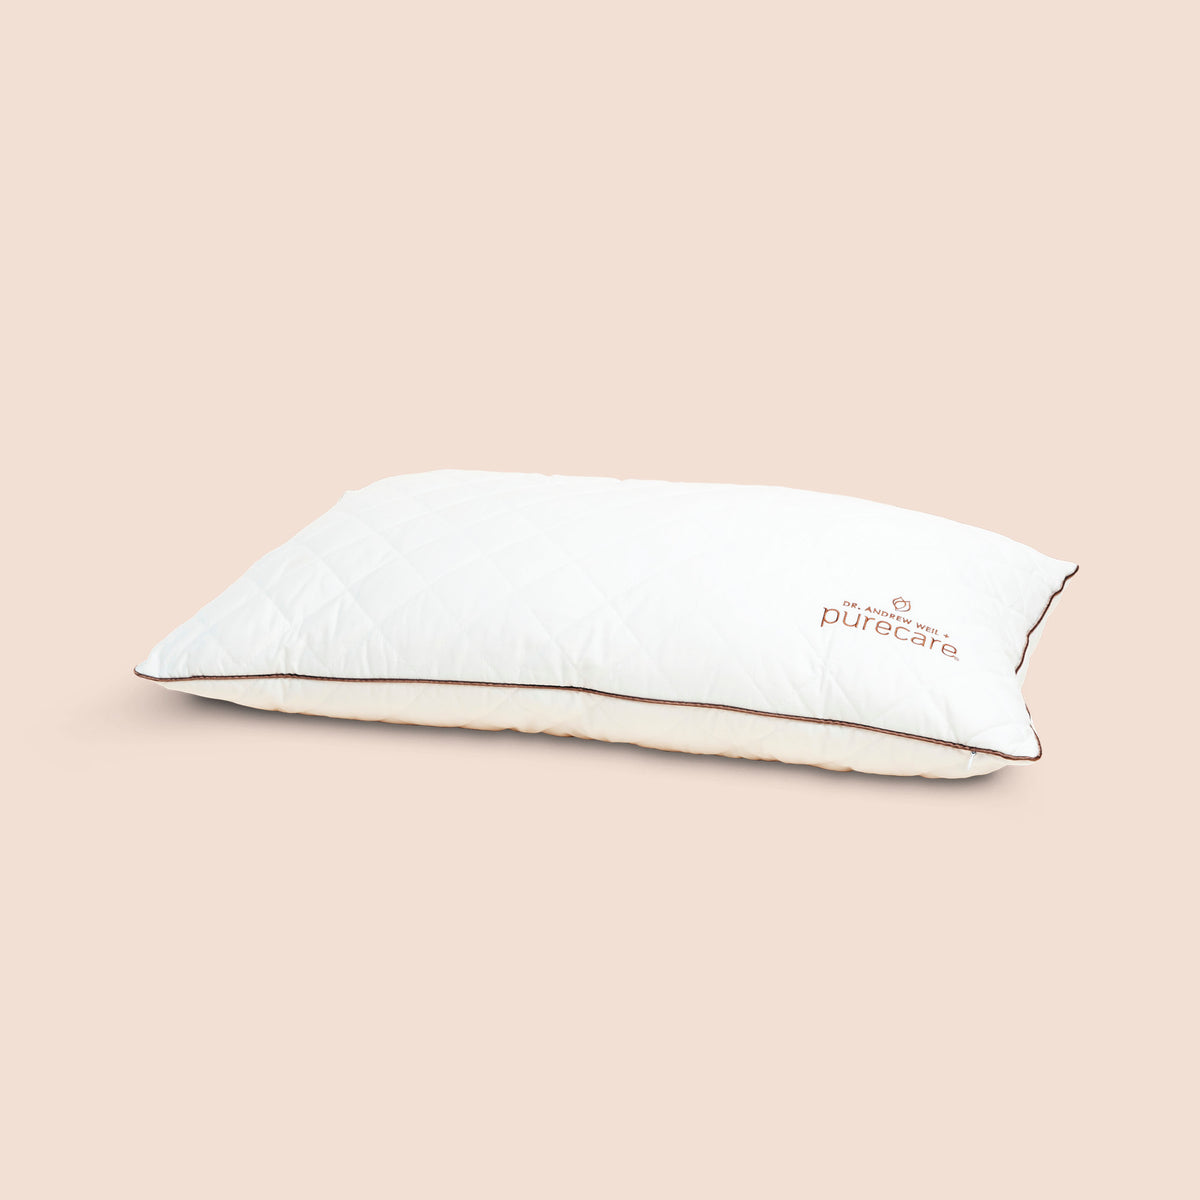 Image of All Seasons Wool Pillow on light pink background with Dr. Andrew Weil + Purecare logo in bottom right corner of pillow